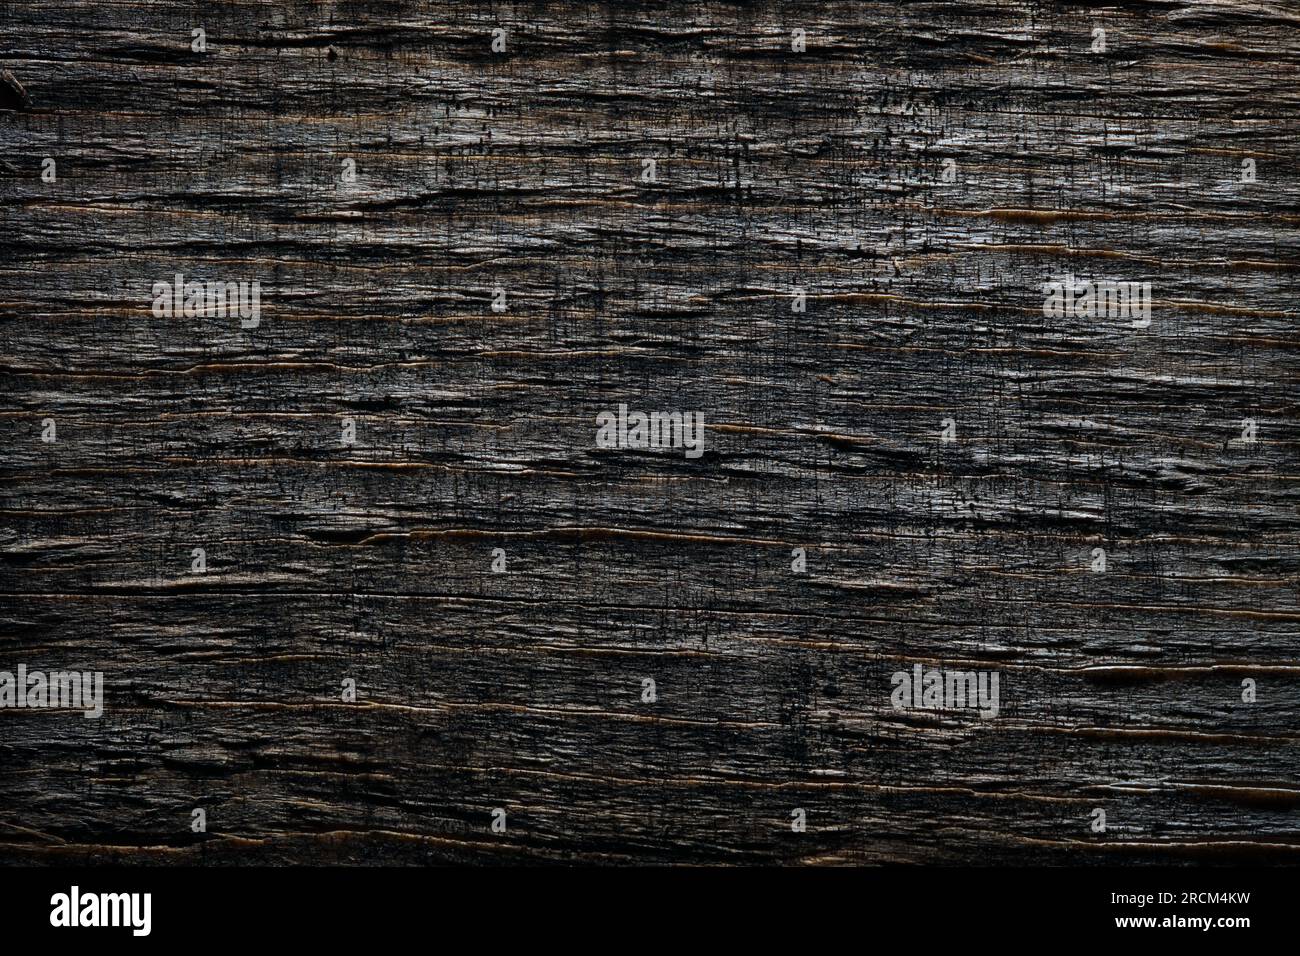 Worn wooden background or texture Stock Photo